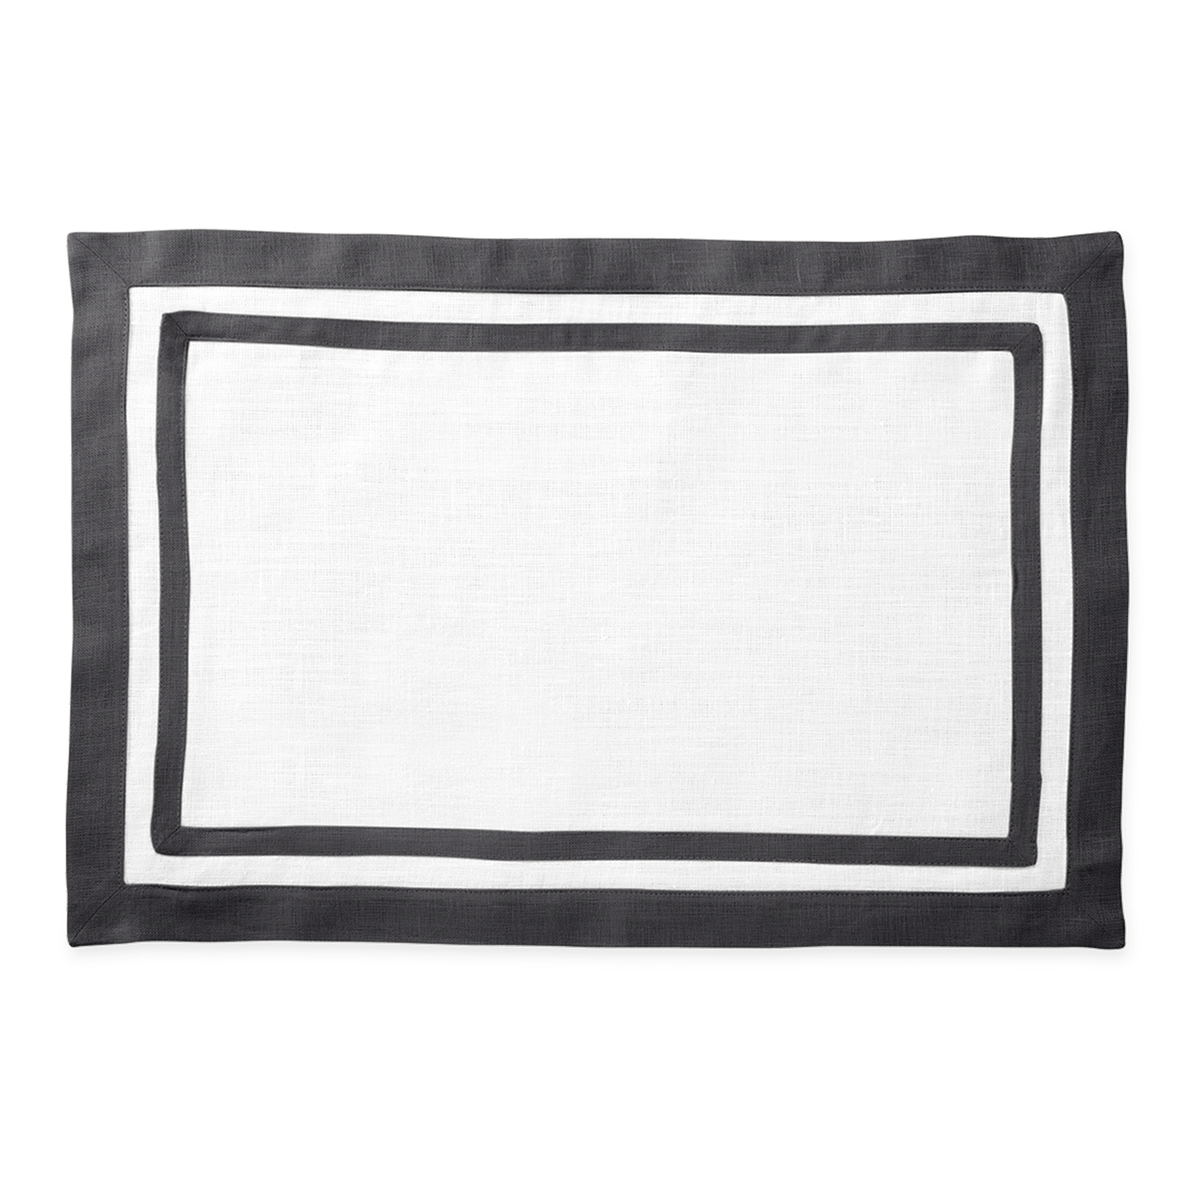 Silo Image of Matouk Double Border Rectangle Placemat in Color Smoke Grey